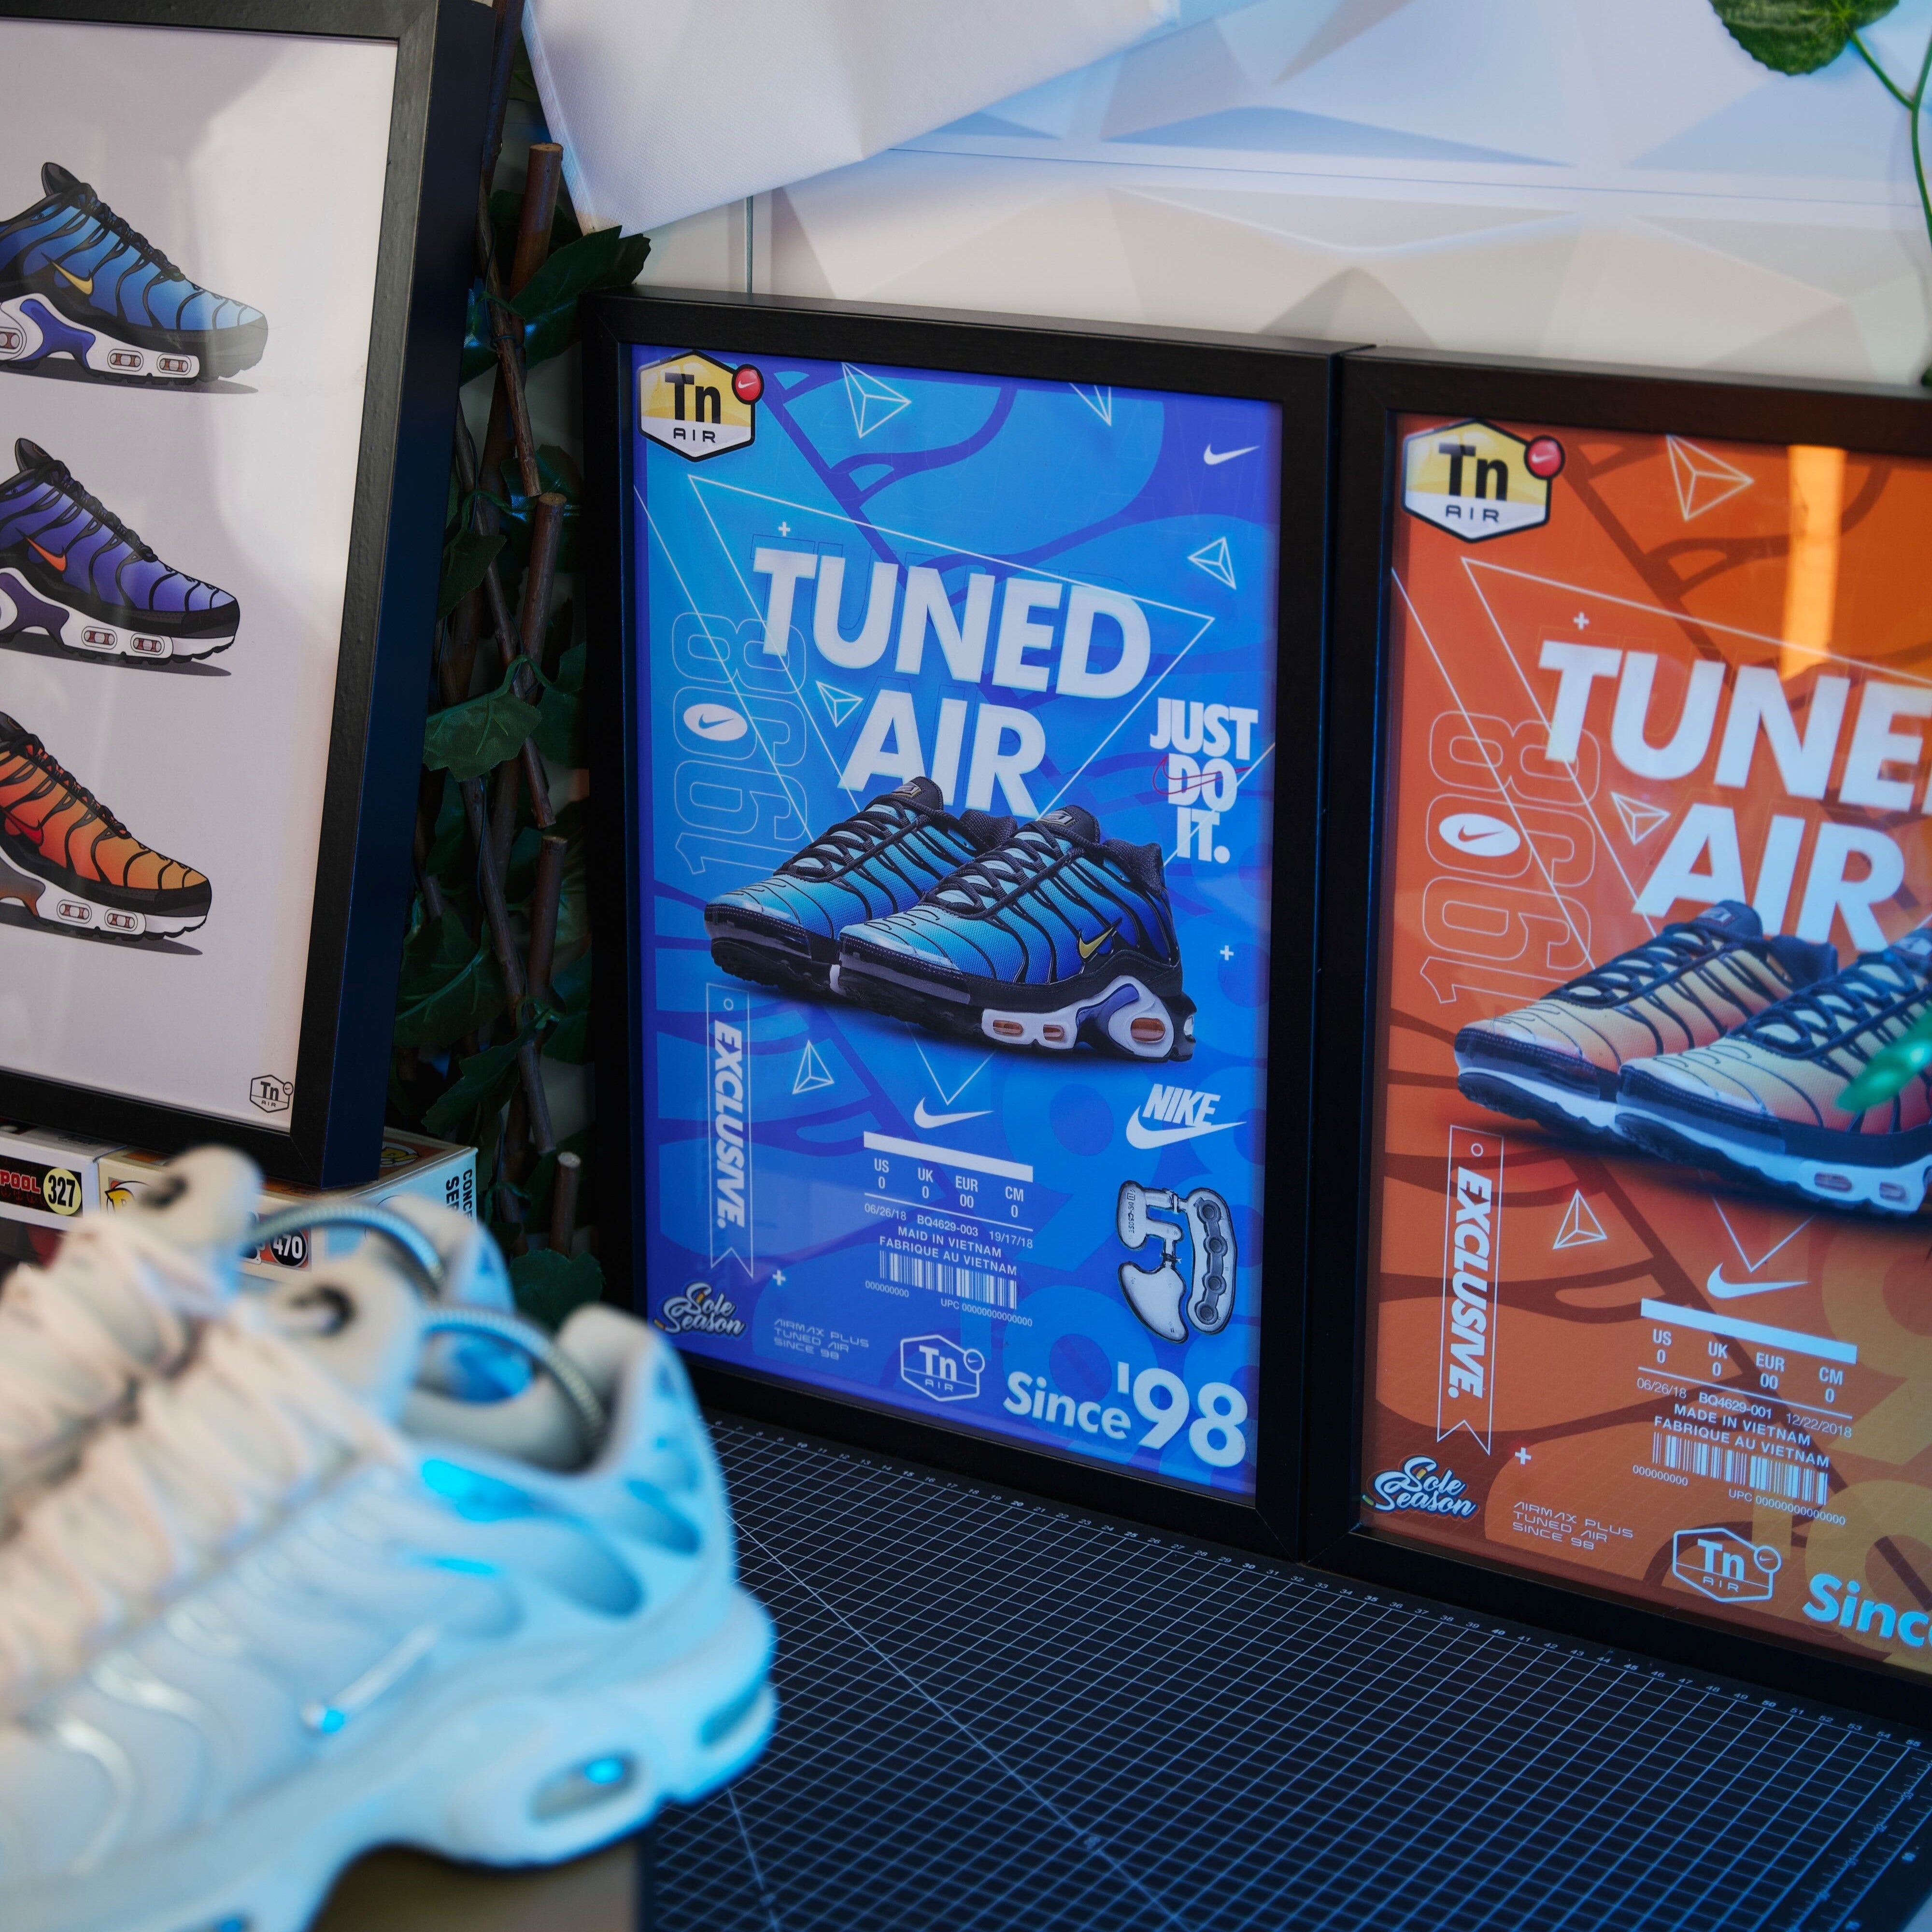 Nike Tn Posters - Air Max Plus Posters - CHEAP Worldwide Shipping!